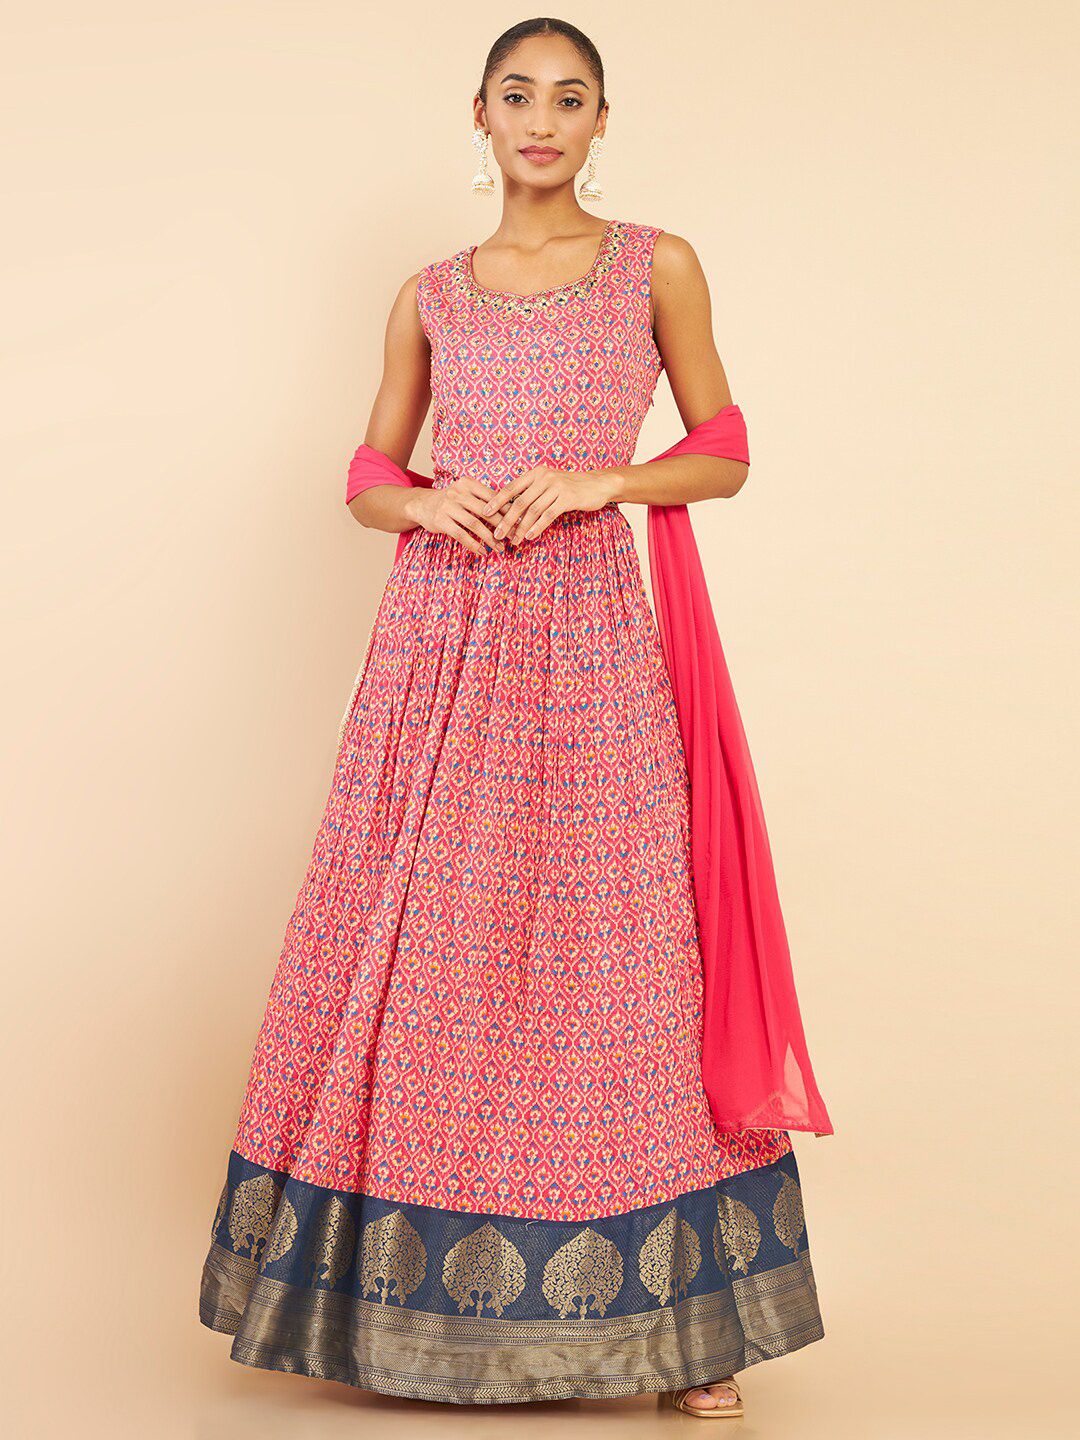 Soch Pink Printed Printed Ethnic Motifs Ethnic Maxi Dress With Dupatta Price in India